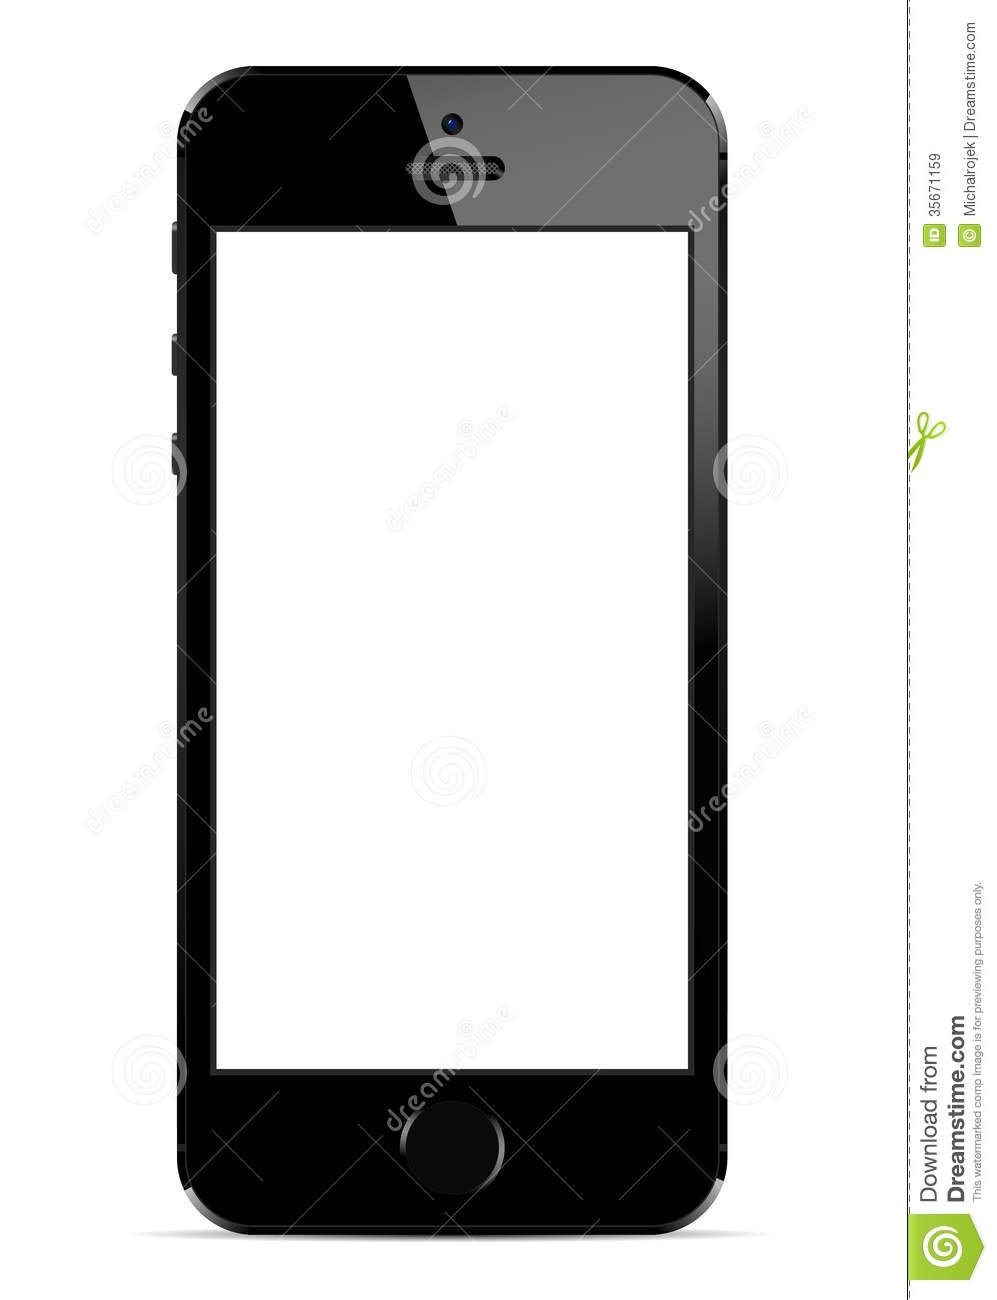 White Iphone Clipart Iphone 5 With White Screen